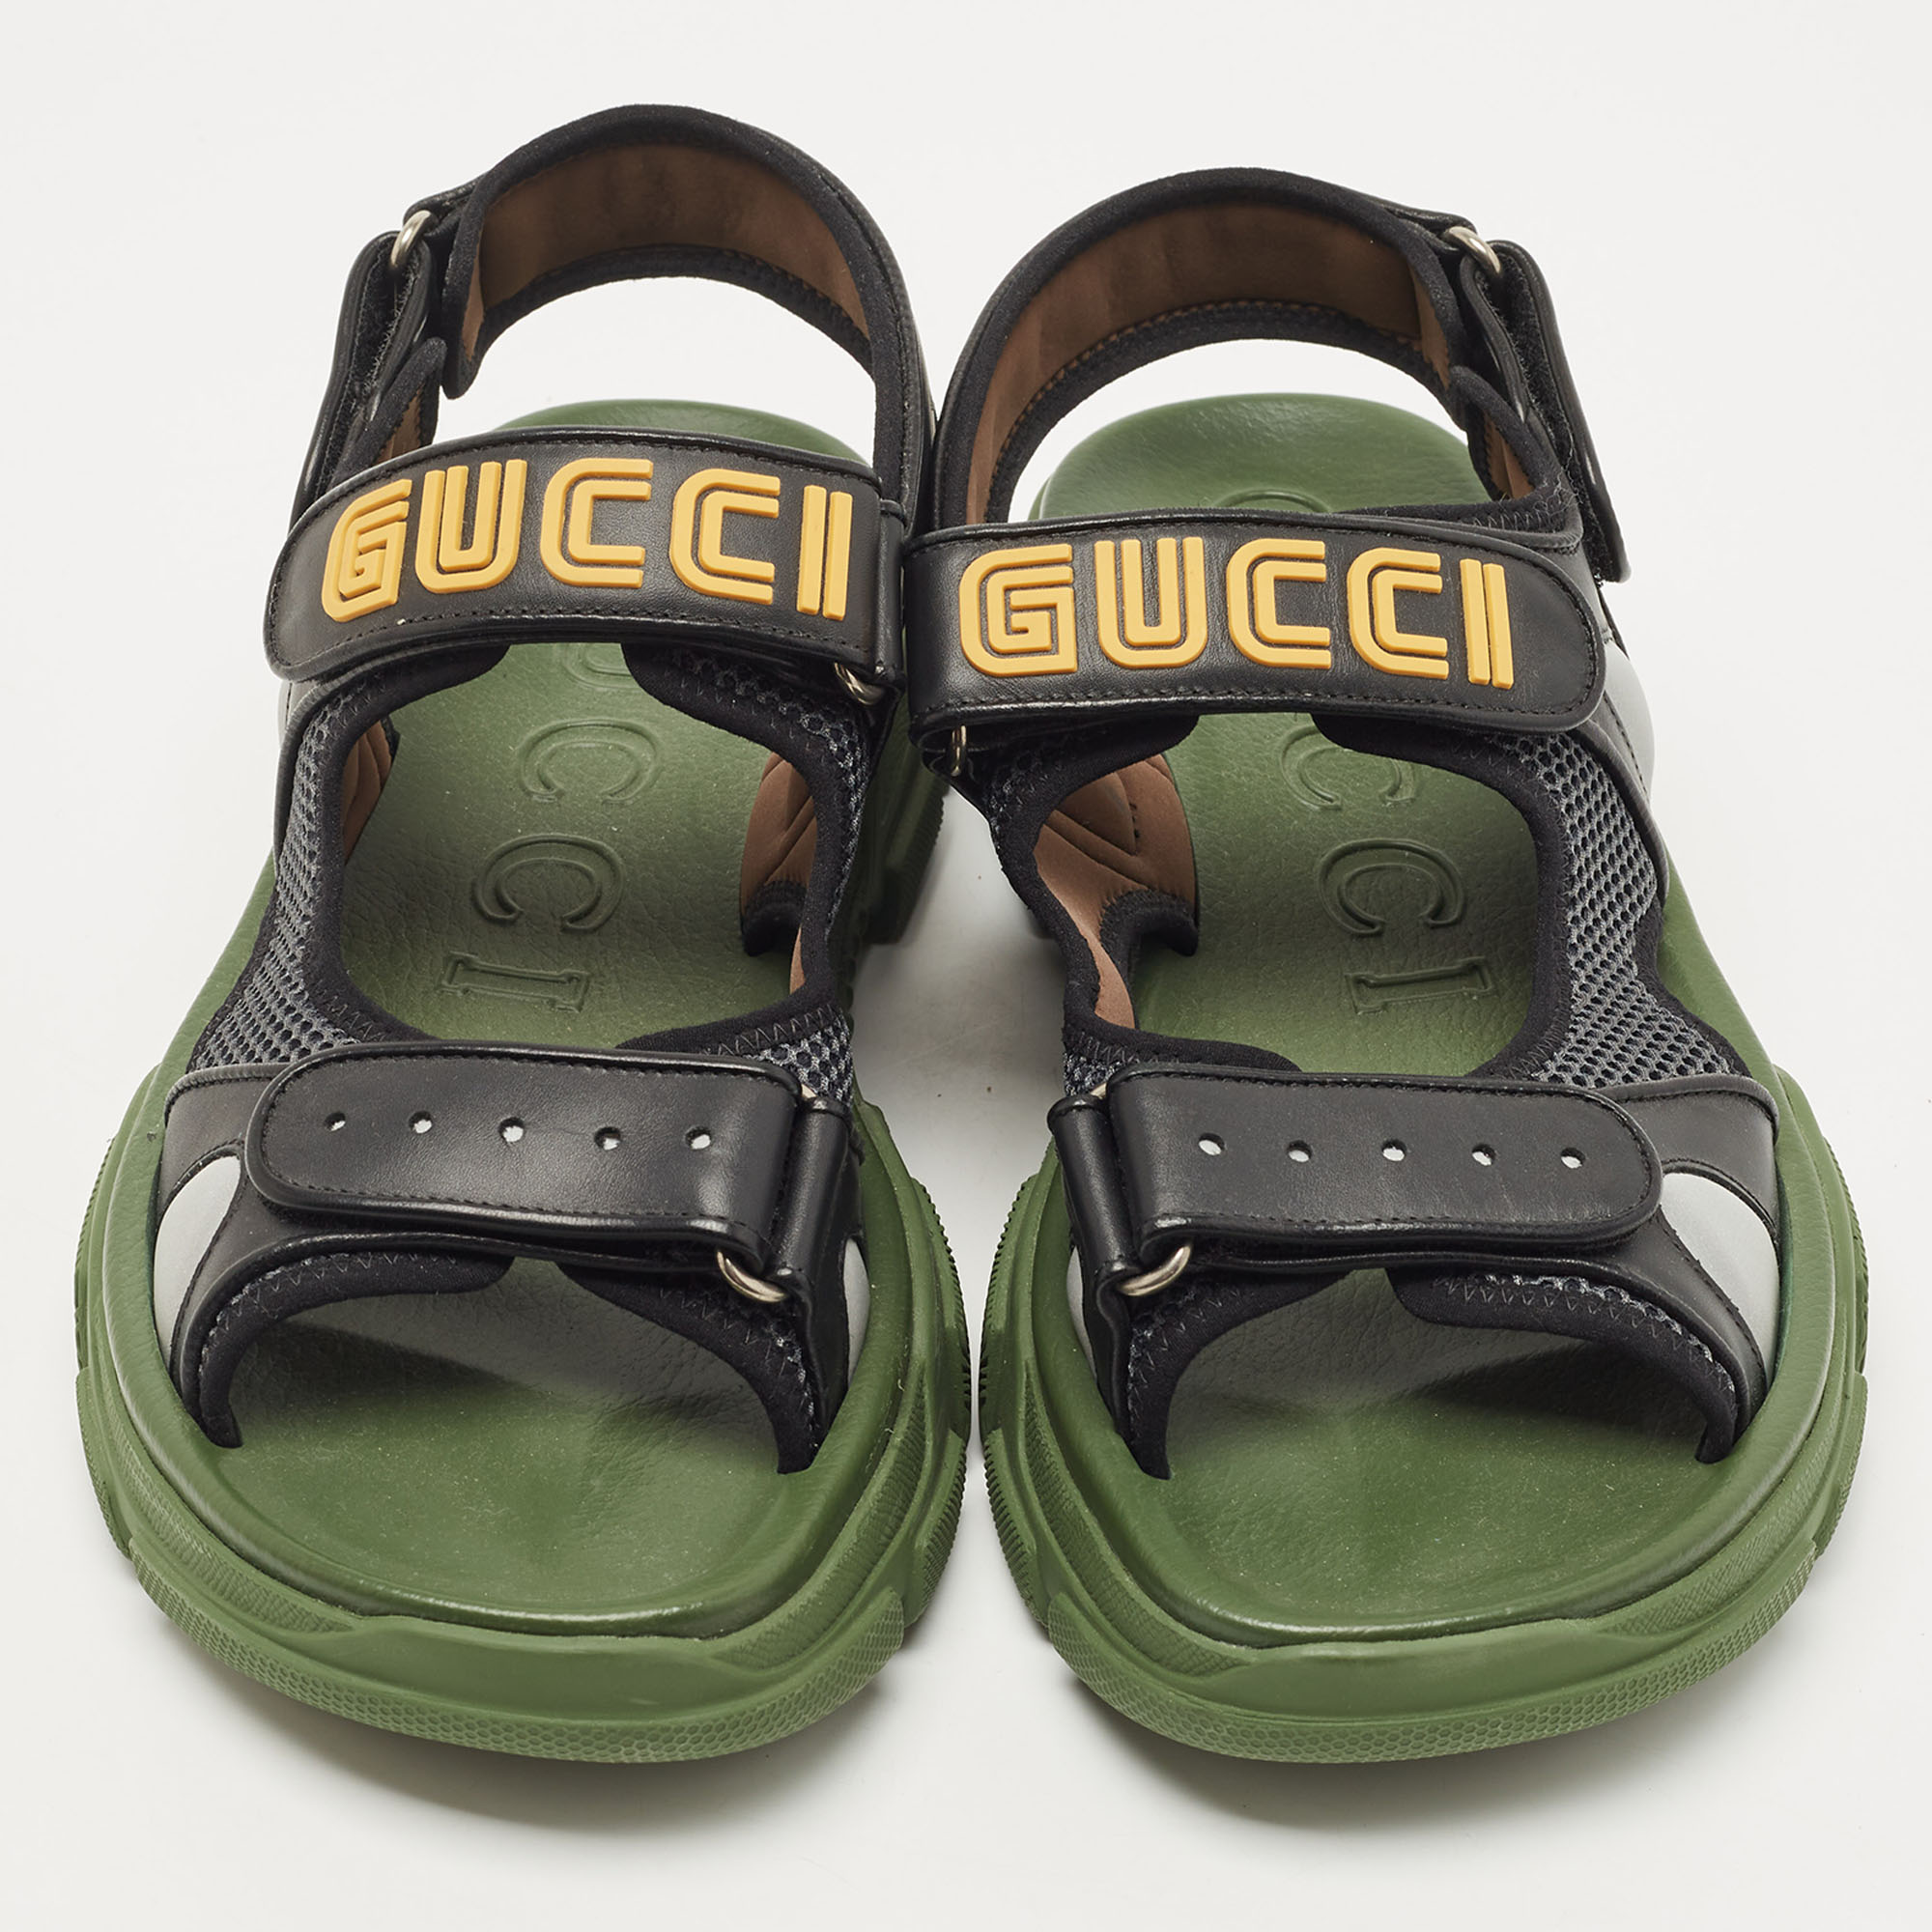 Gucci Black/Green Leather And Mesh Sega Sandals Size 44